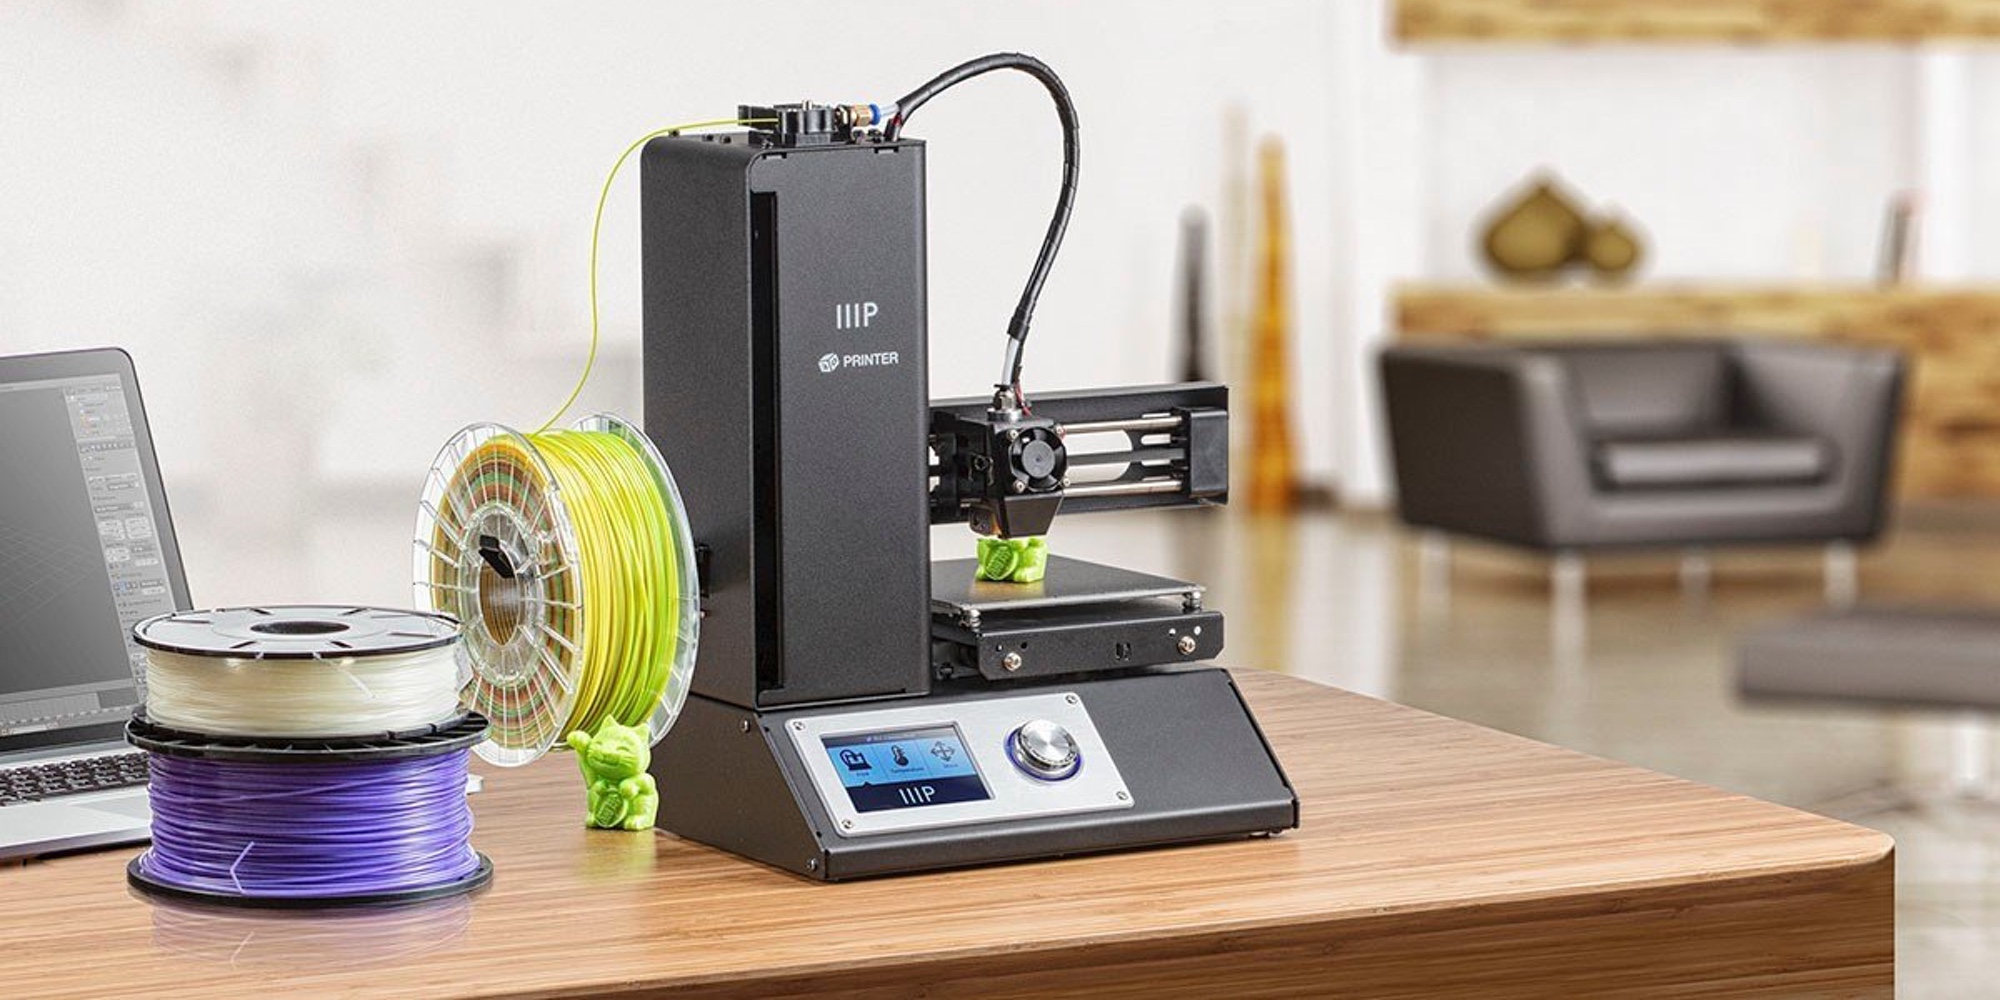 monoprice-s-select-mini-3d-printer-is-down-to-a-new-low-at-120-refurb